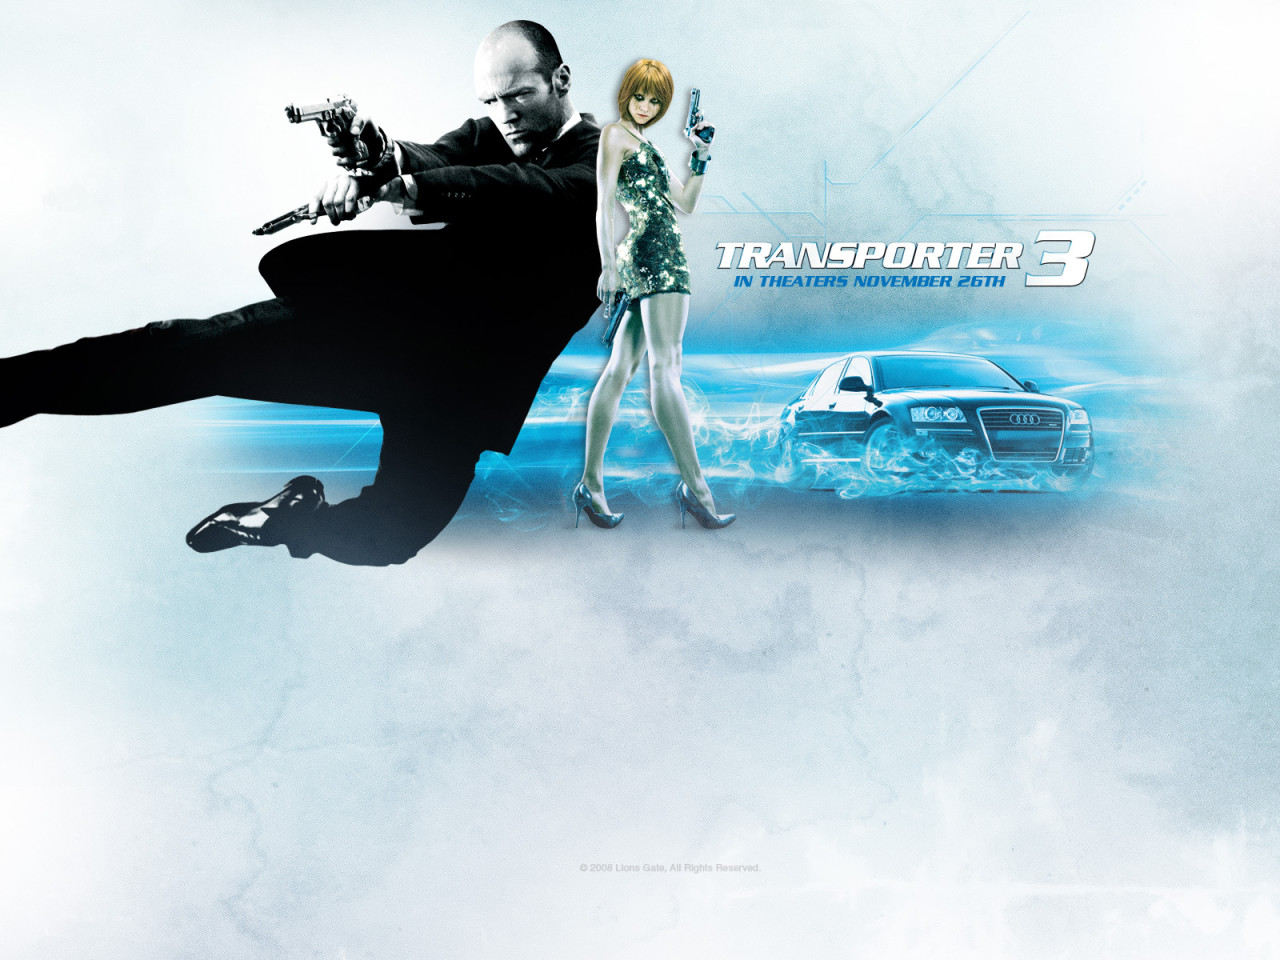 Previous, Movies - Films T - Transporter 3 wallpaper